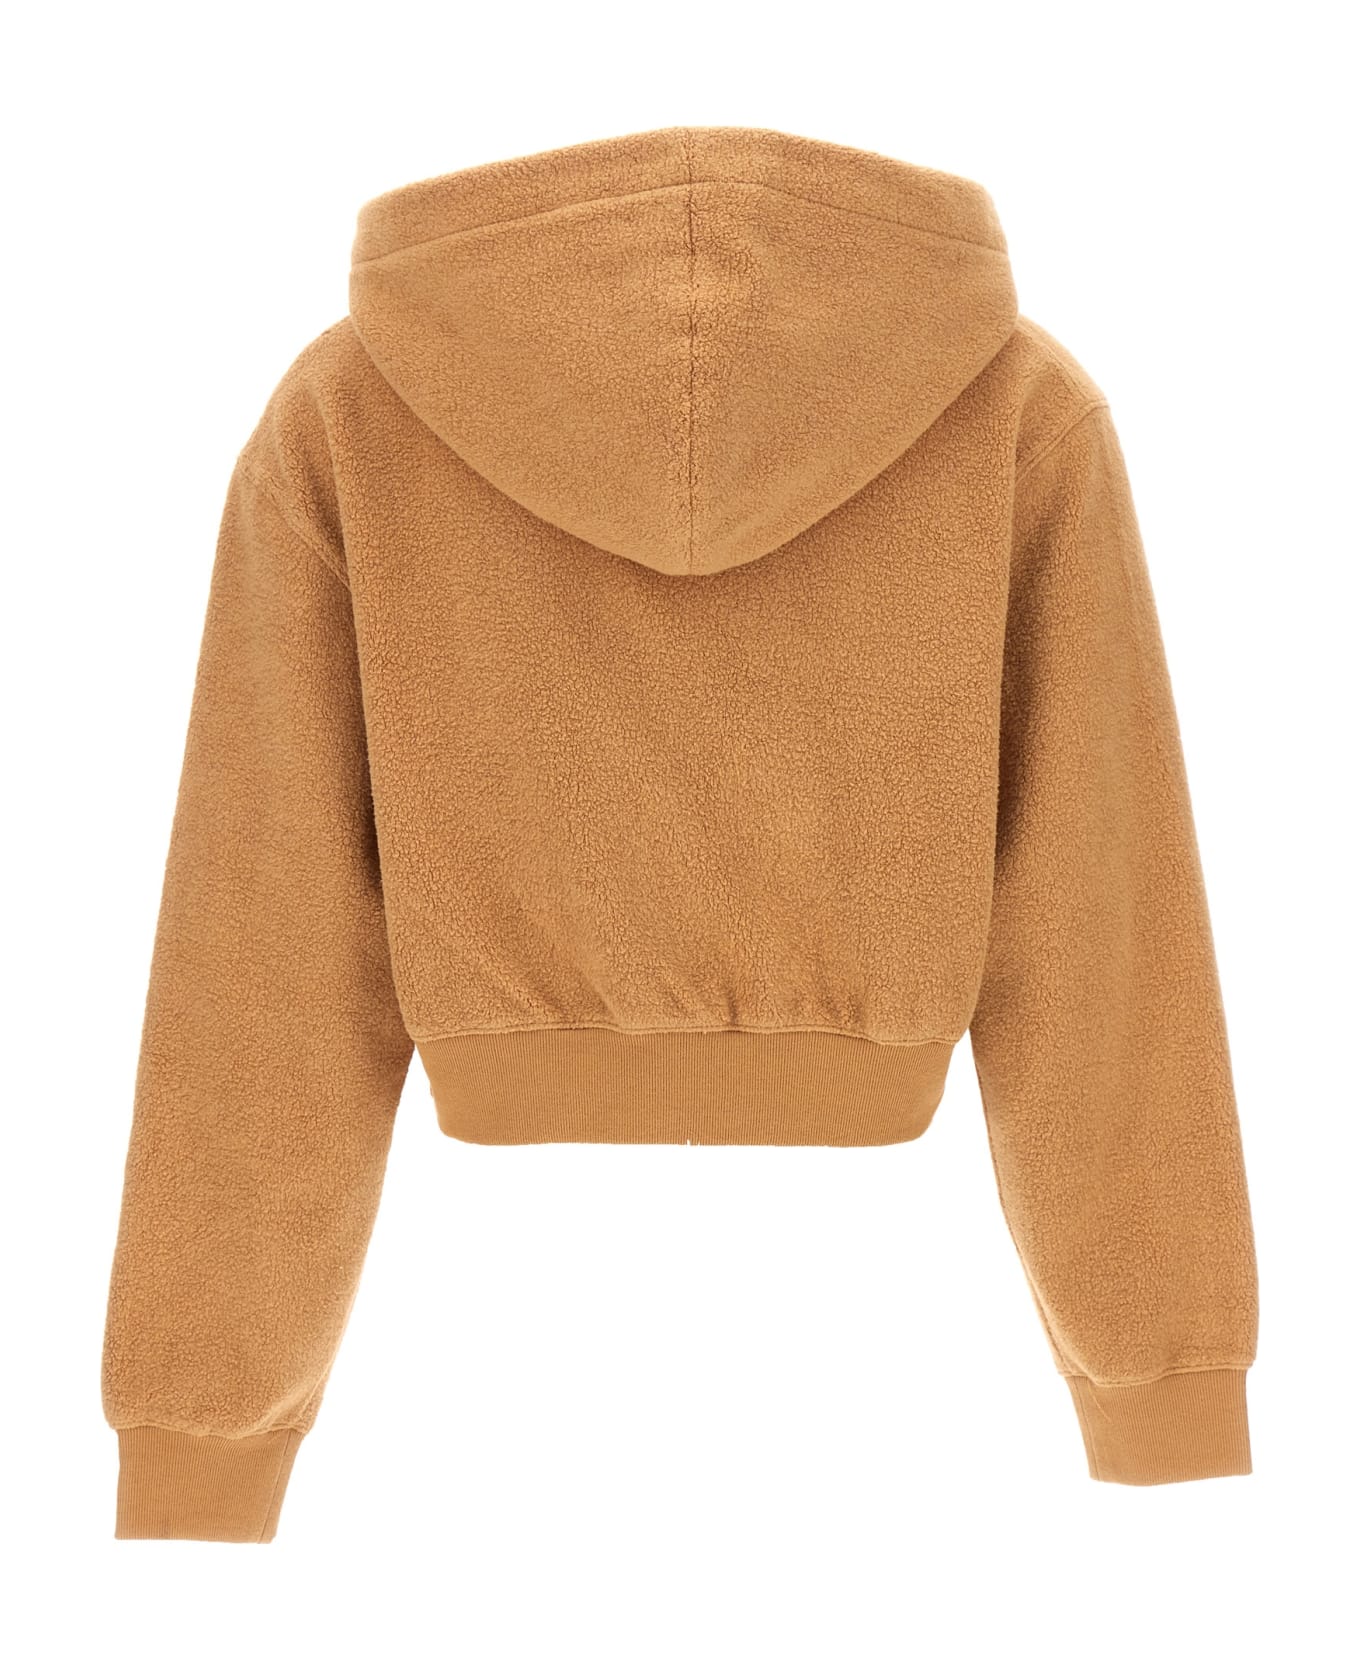 Moschino 'orsetto' Cropped Hoodie - Beige